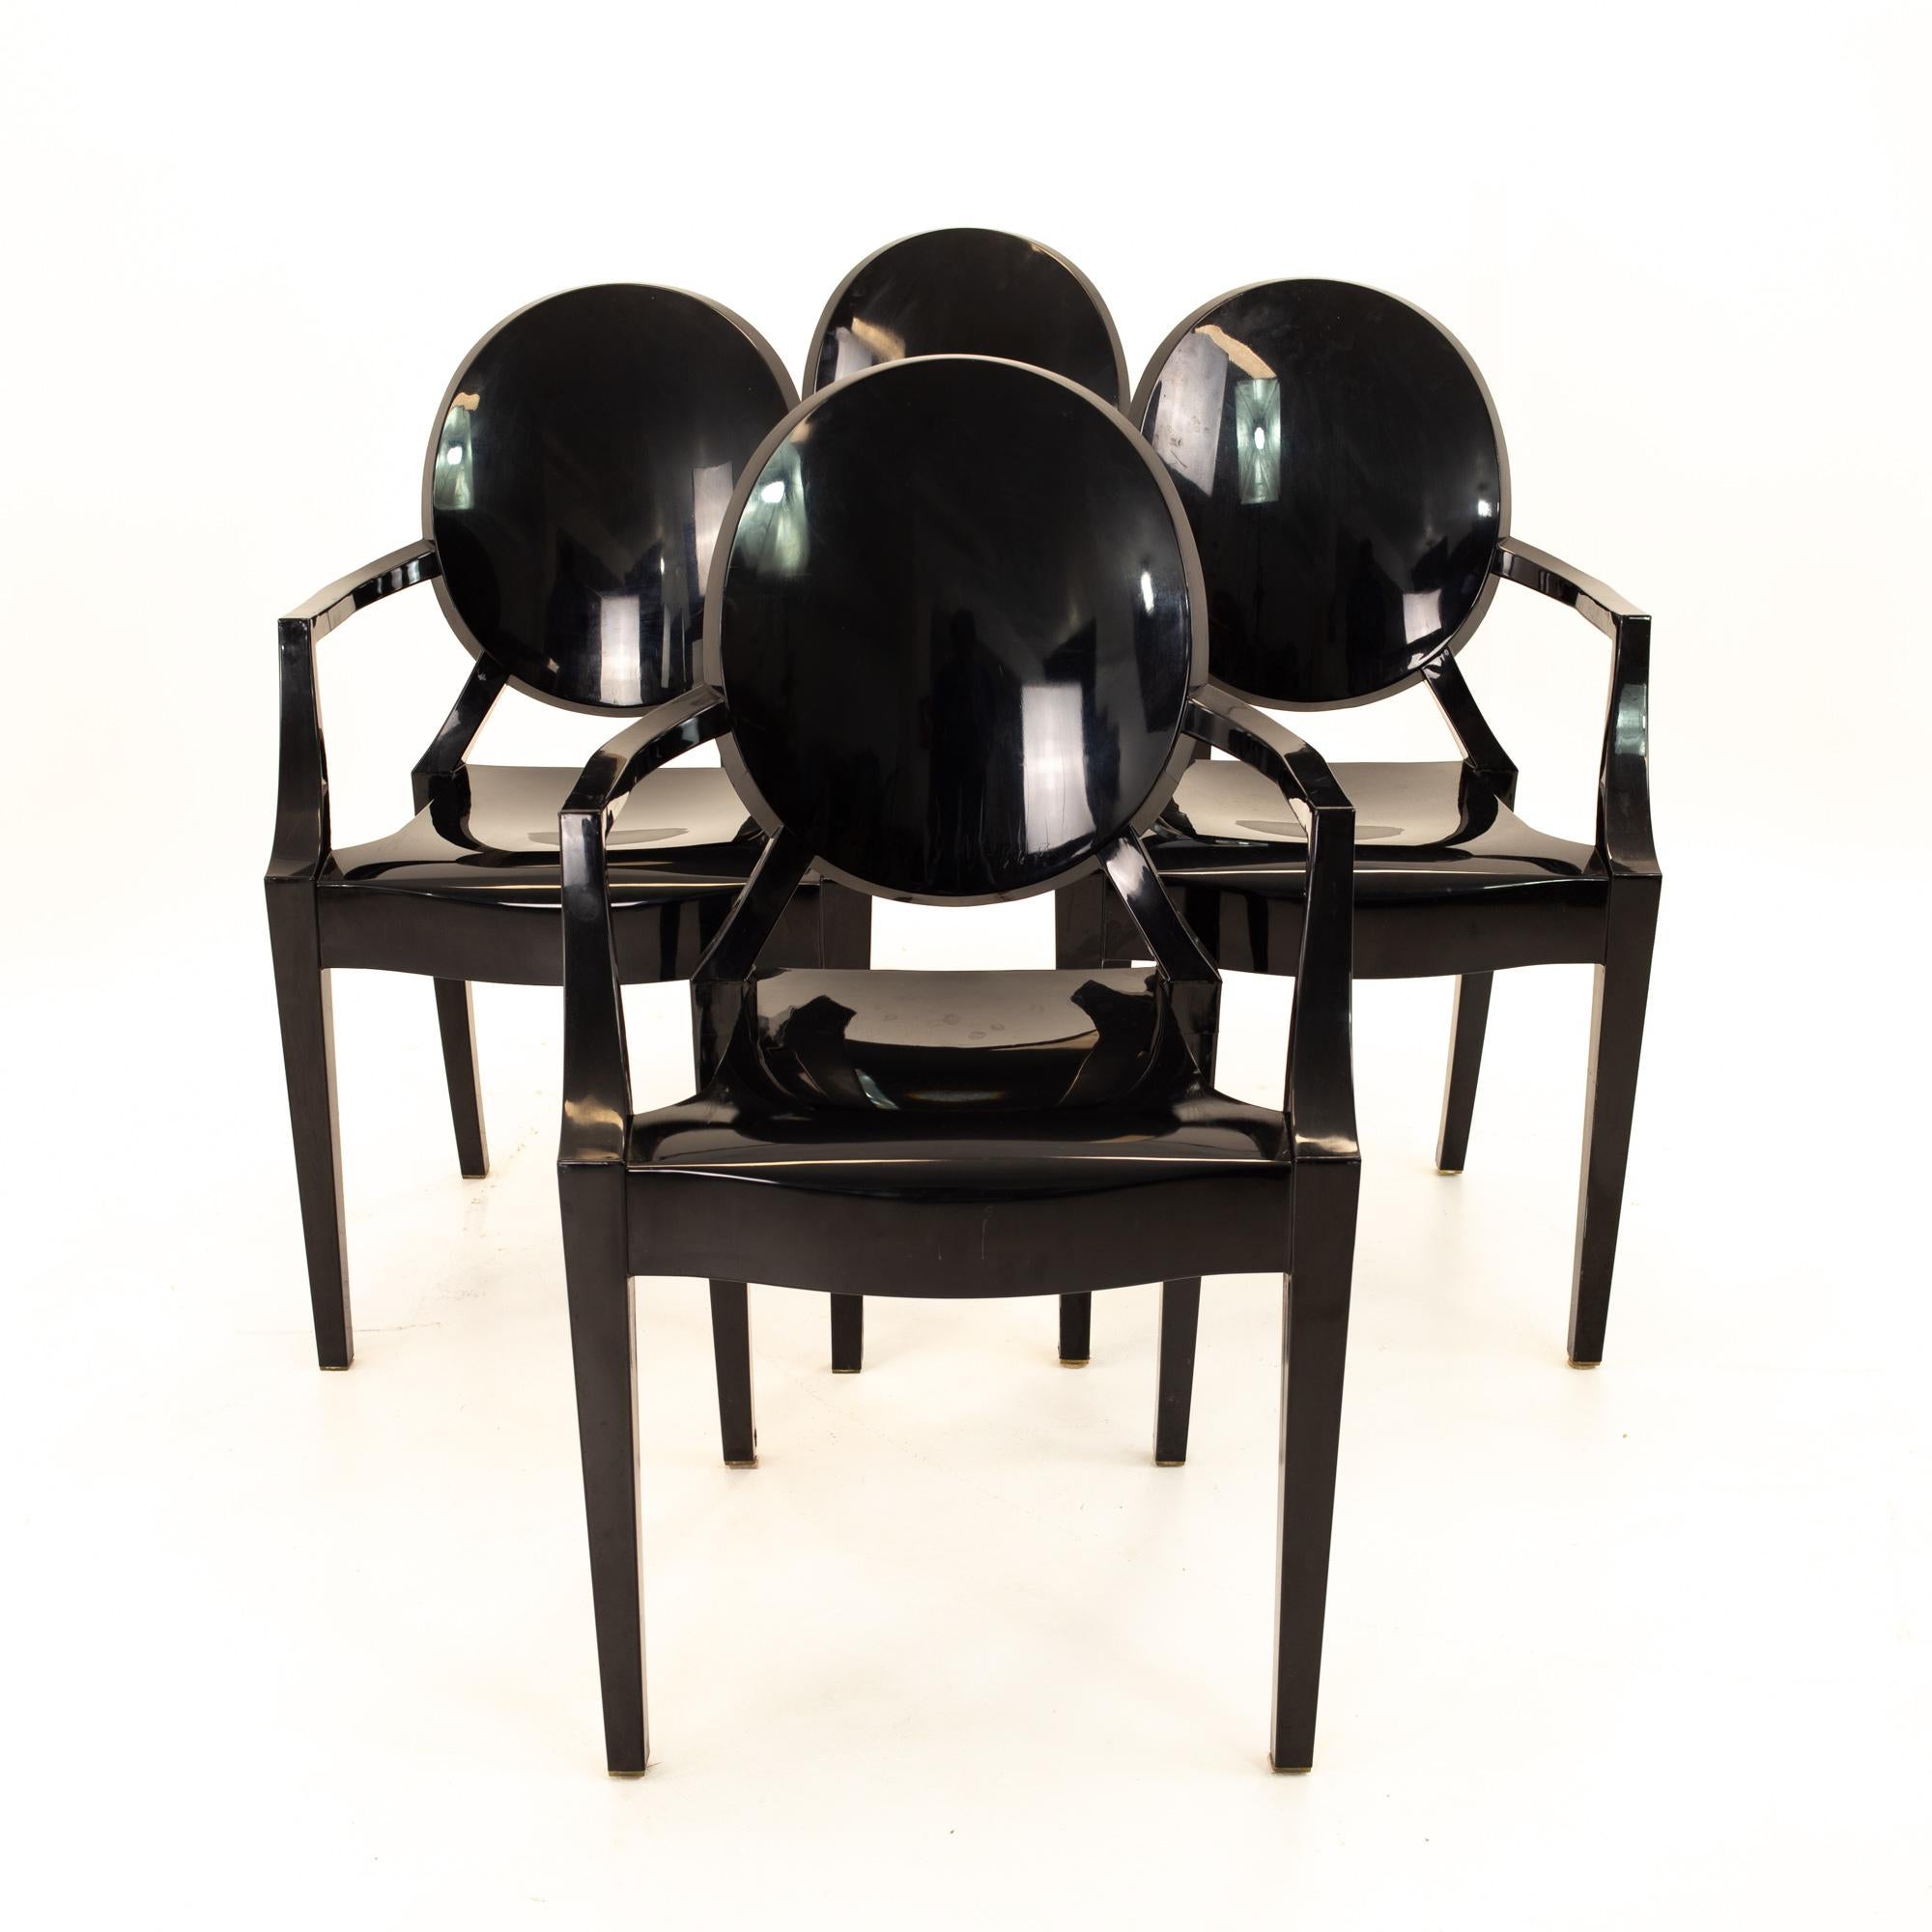 Kartell Mid Century black acrylic ghost dining chairs - set of 4
Each chair measures: 21.25 wide x 22 deep x 36.5 high with a seat height of 19 inches

If this is not quite what you're looking for, we have a lot more midcentury / Mid-Century Modern